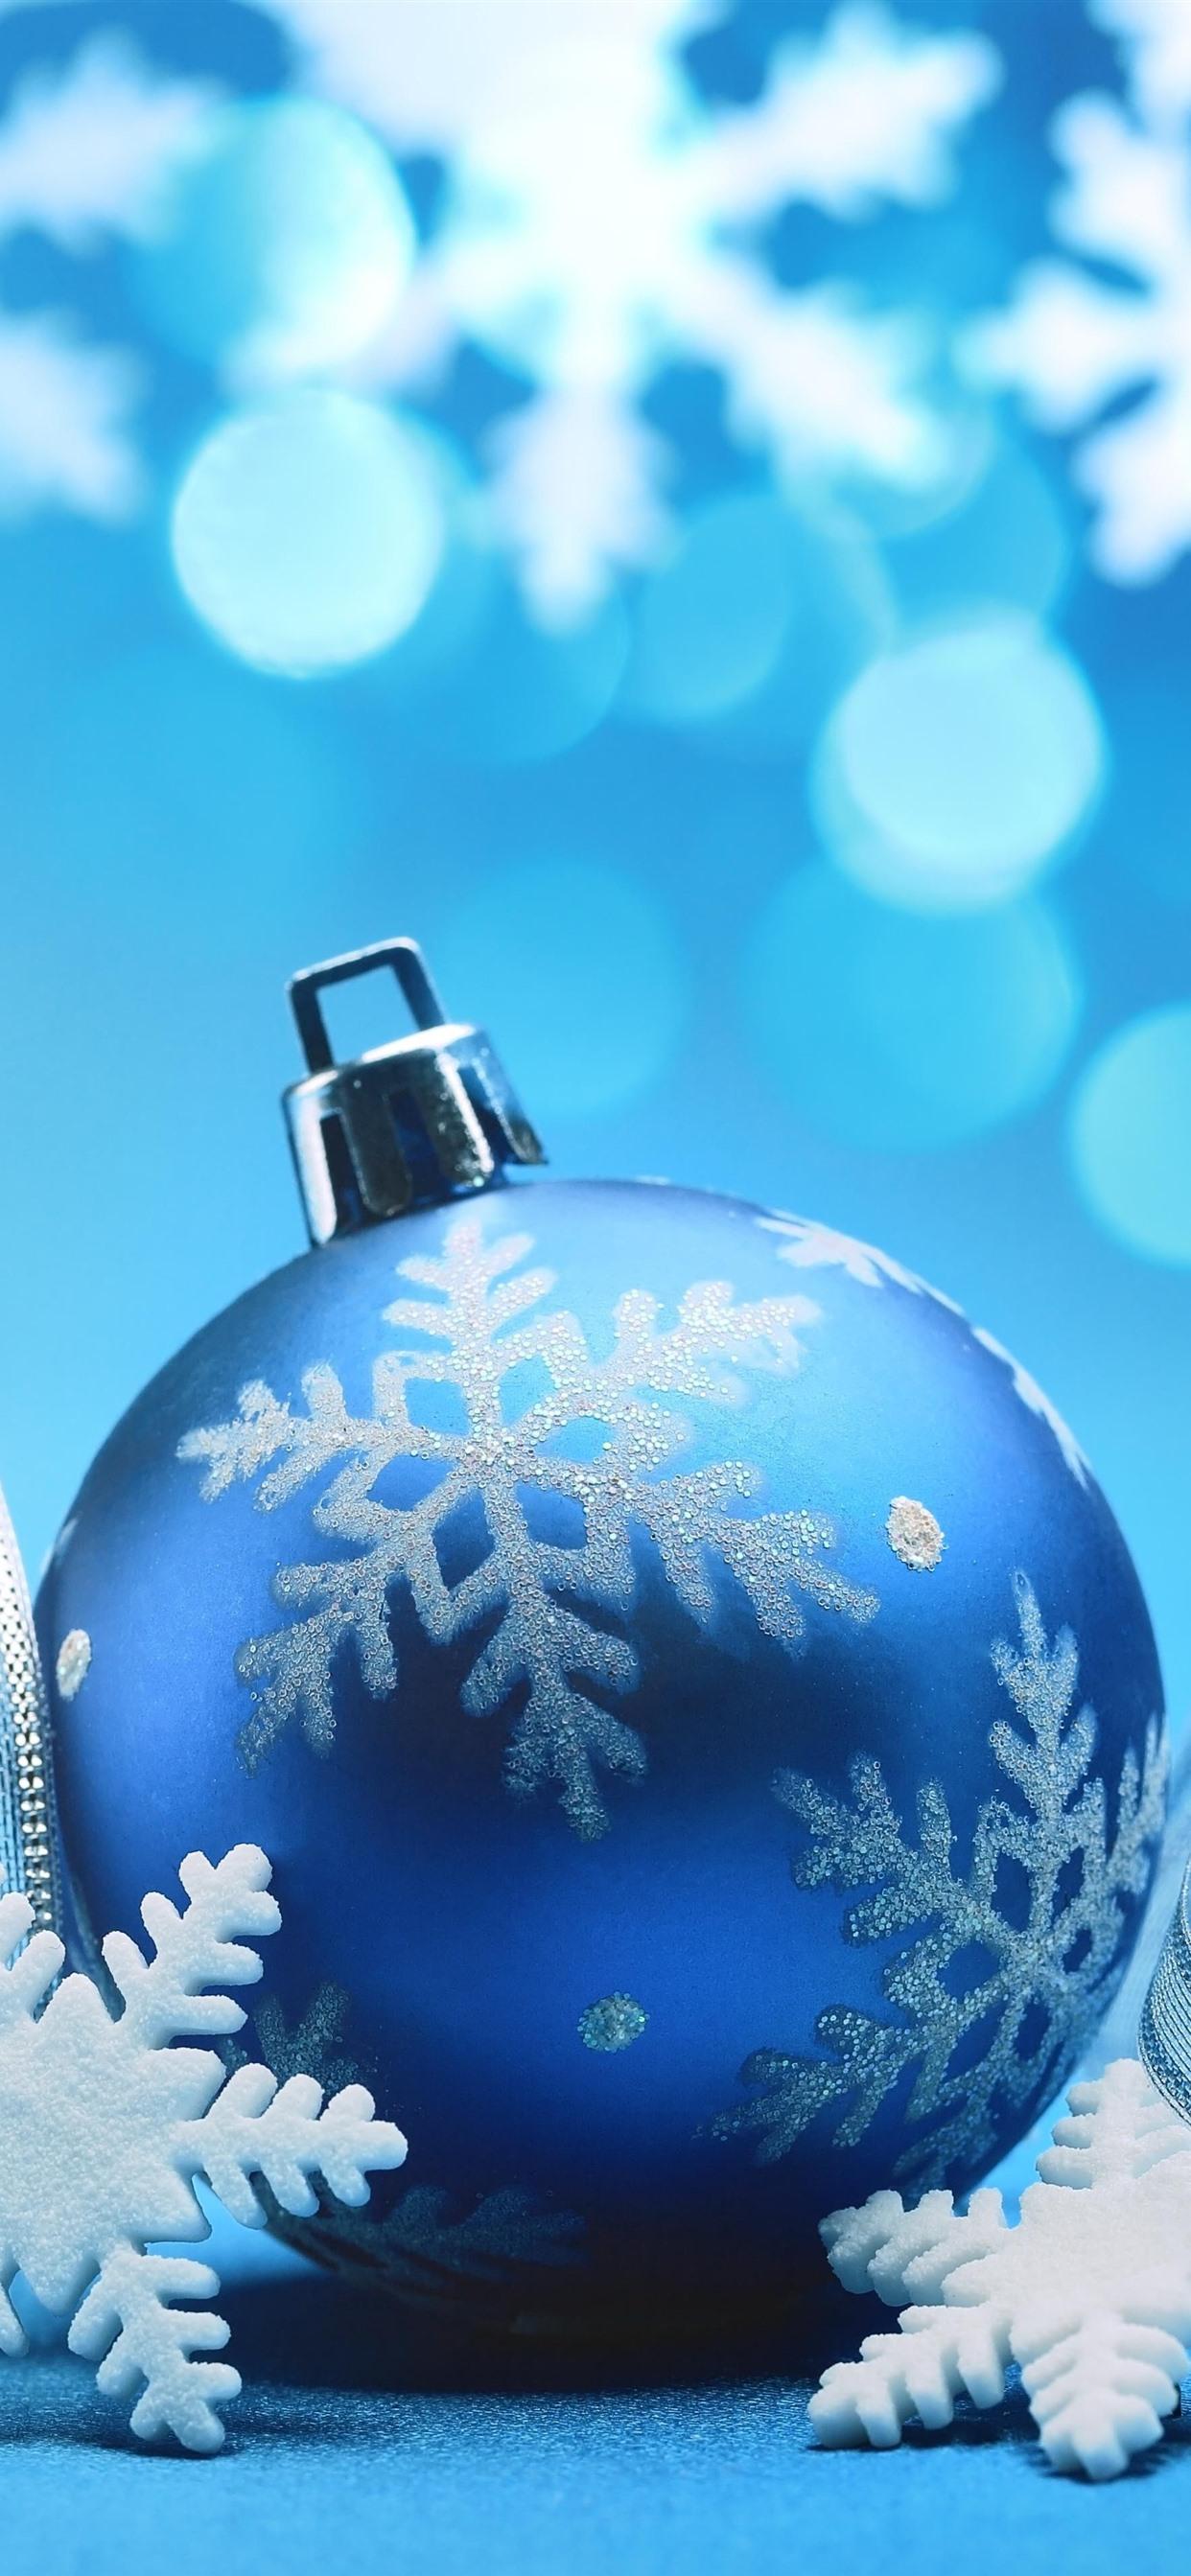 Blue Christmas Ball Ribbons Snowflakes Background